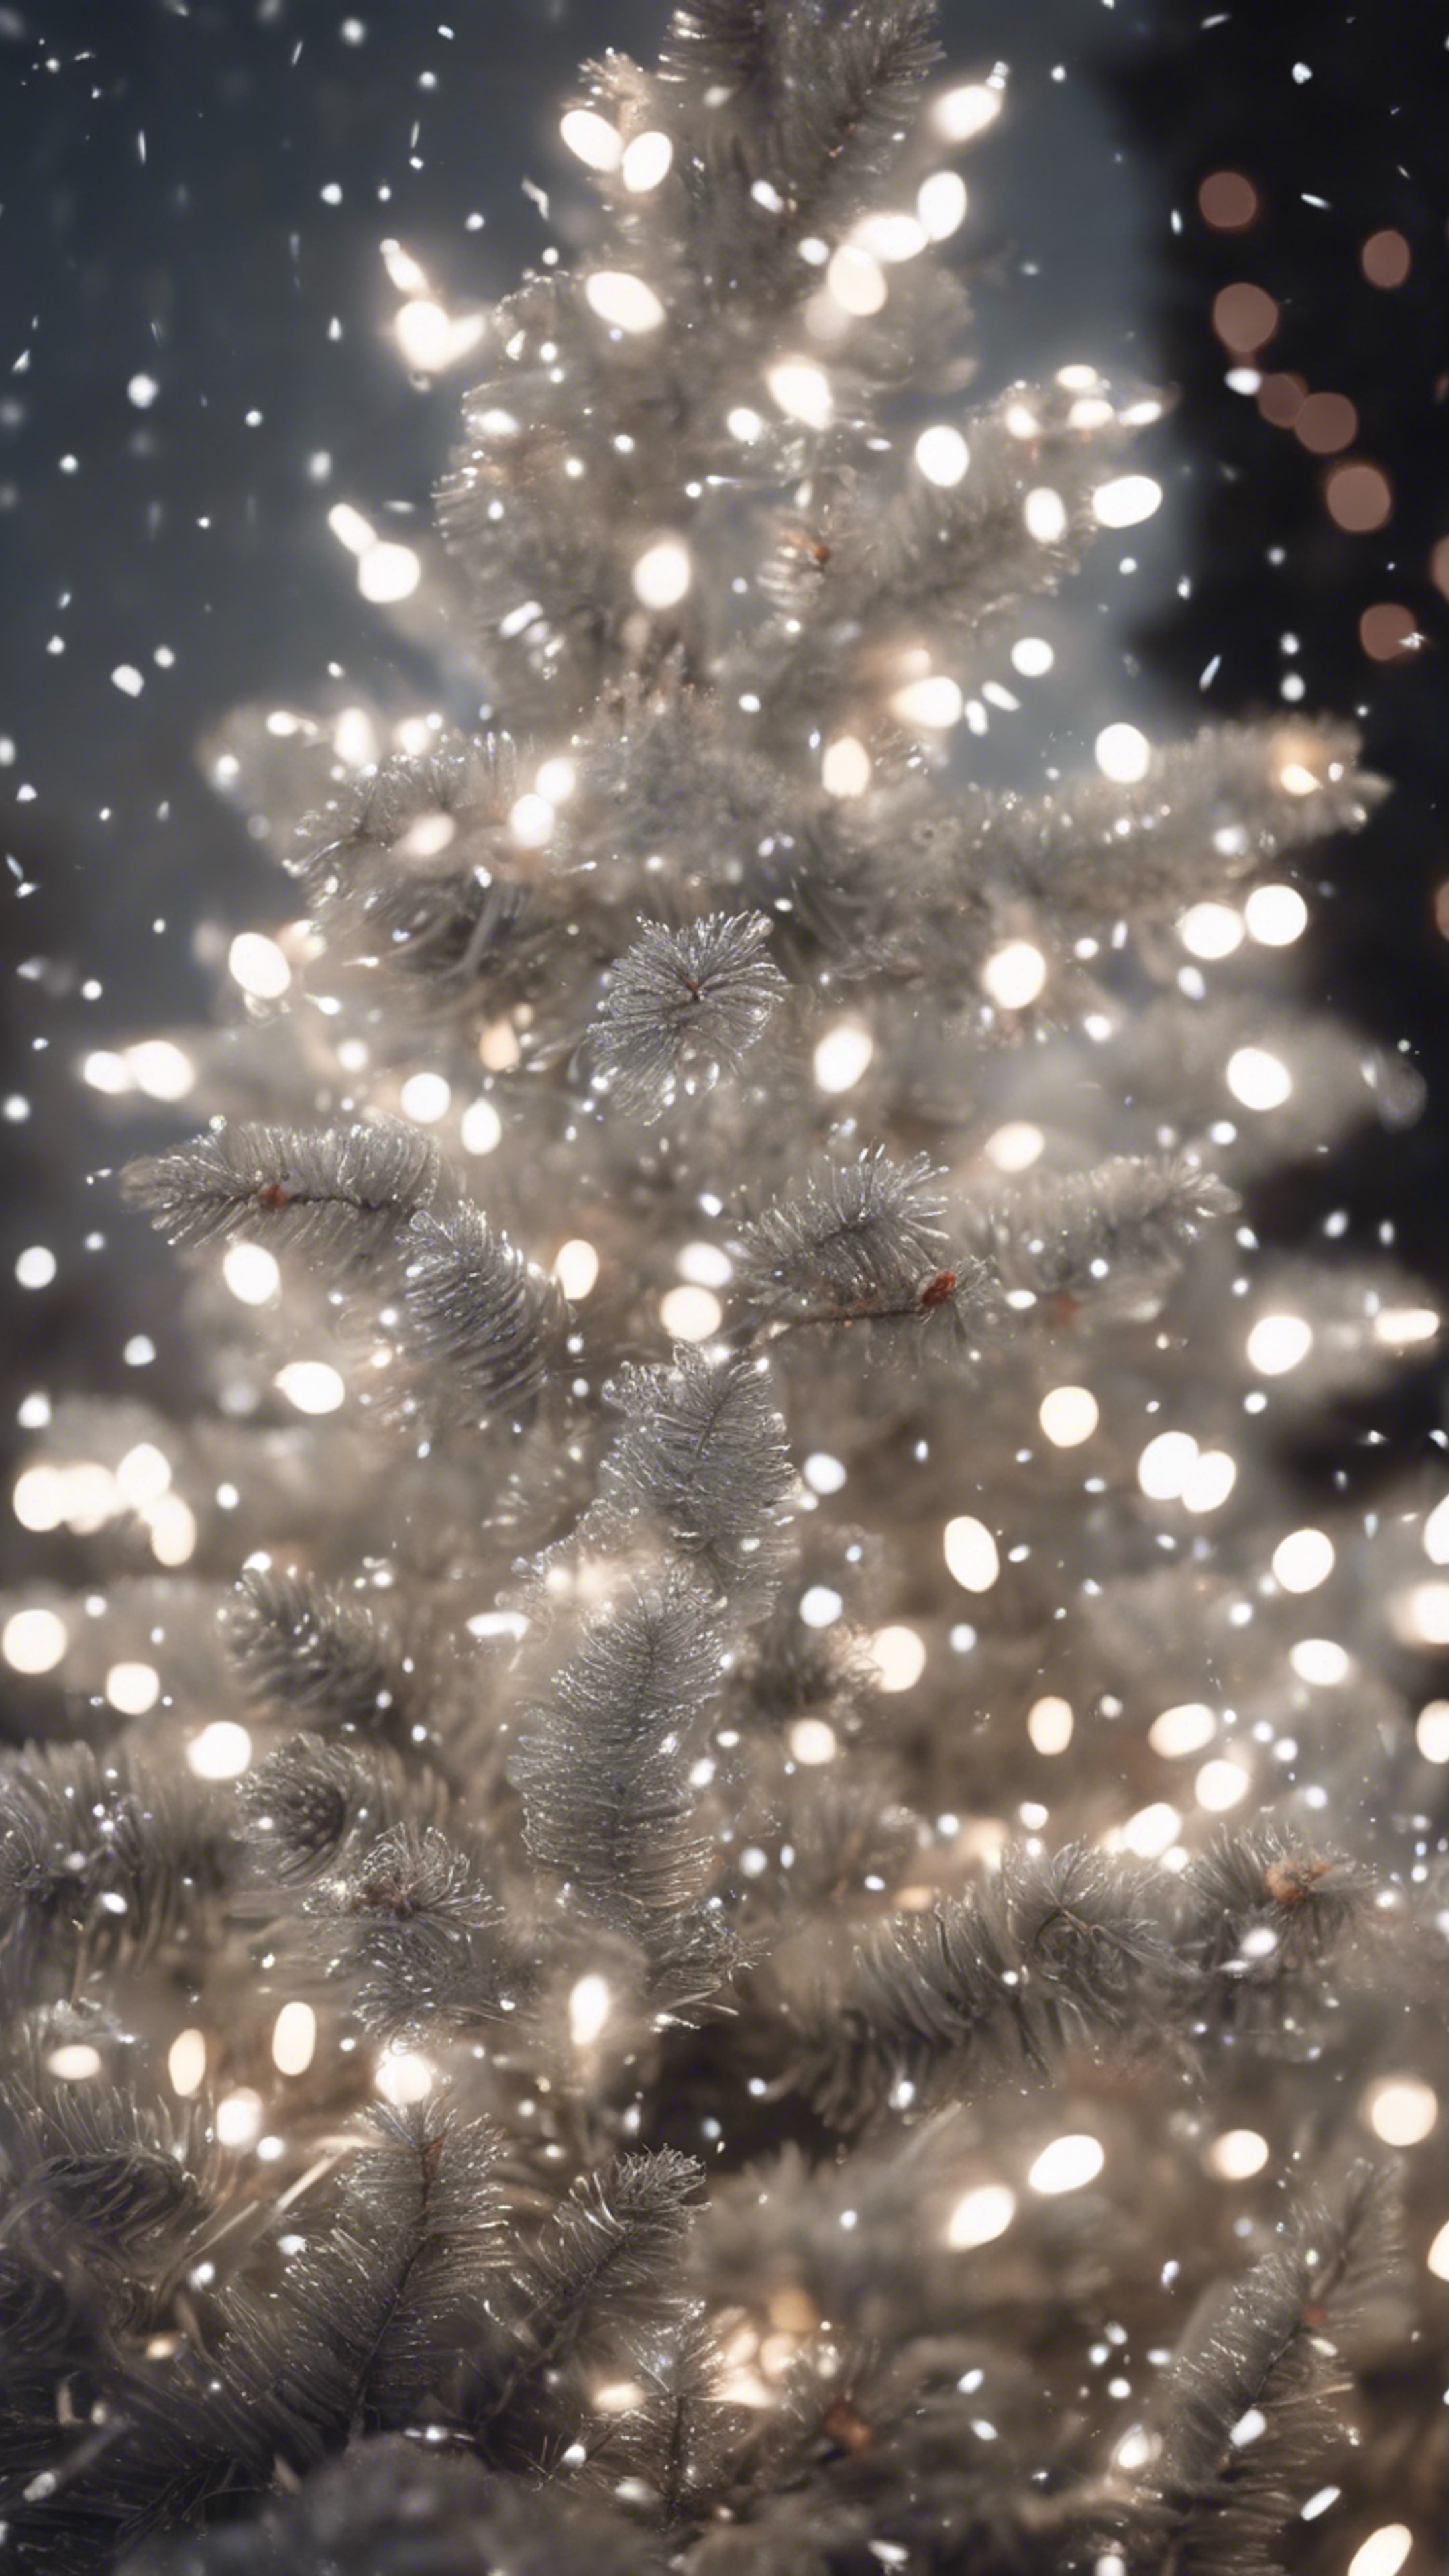 White Christmas lights shimmering on a silver spruce tree, with delicate snowflakes falling around. Fond d'écran[aebc3baa8421448a9f7c]